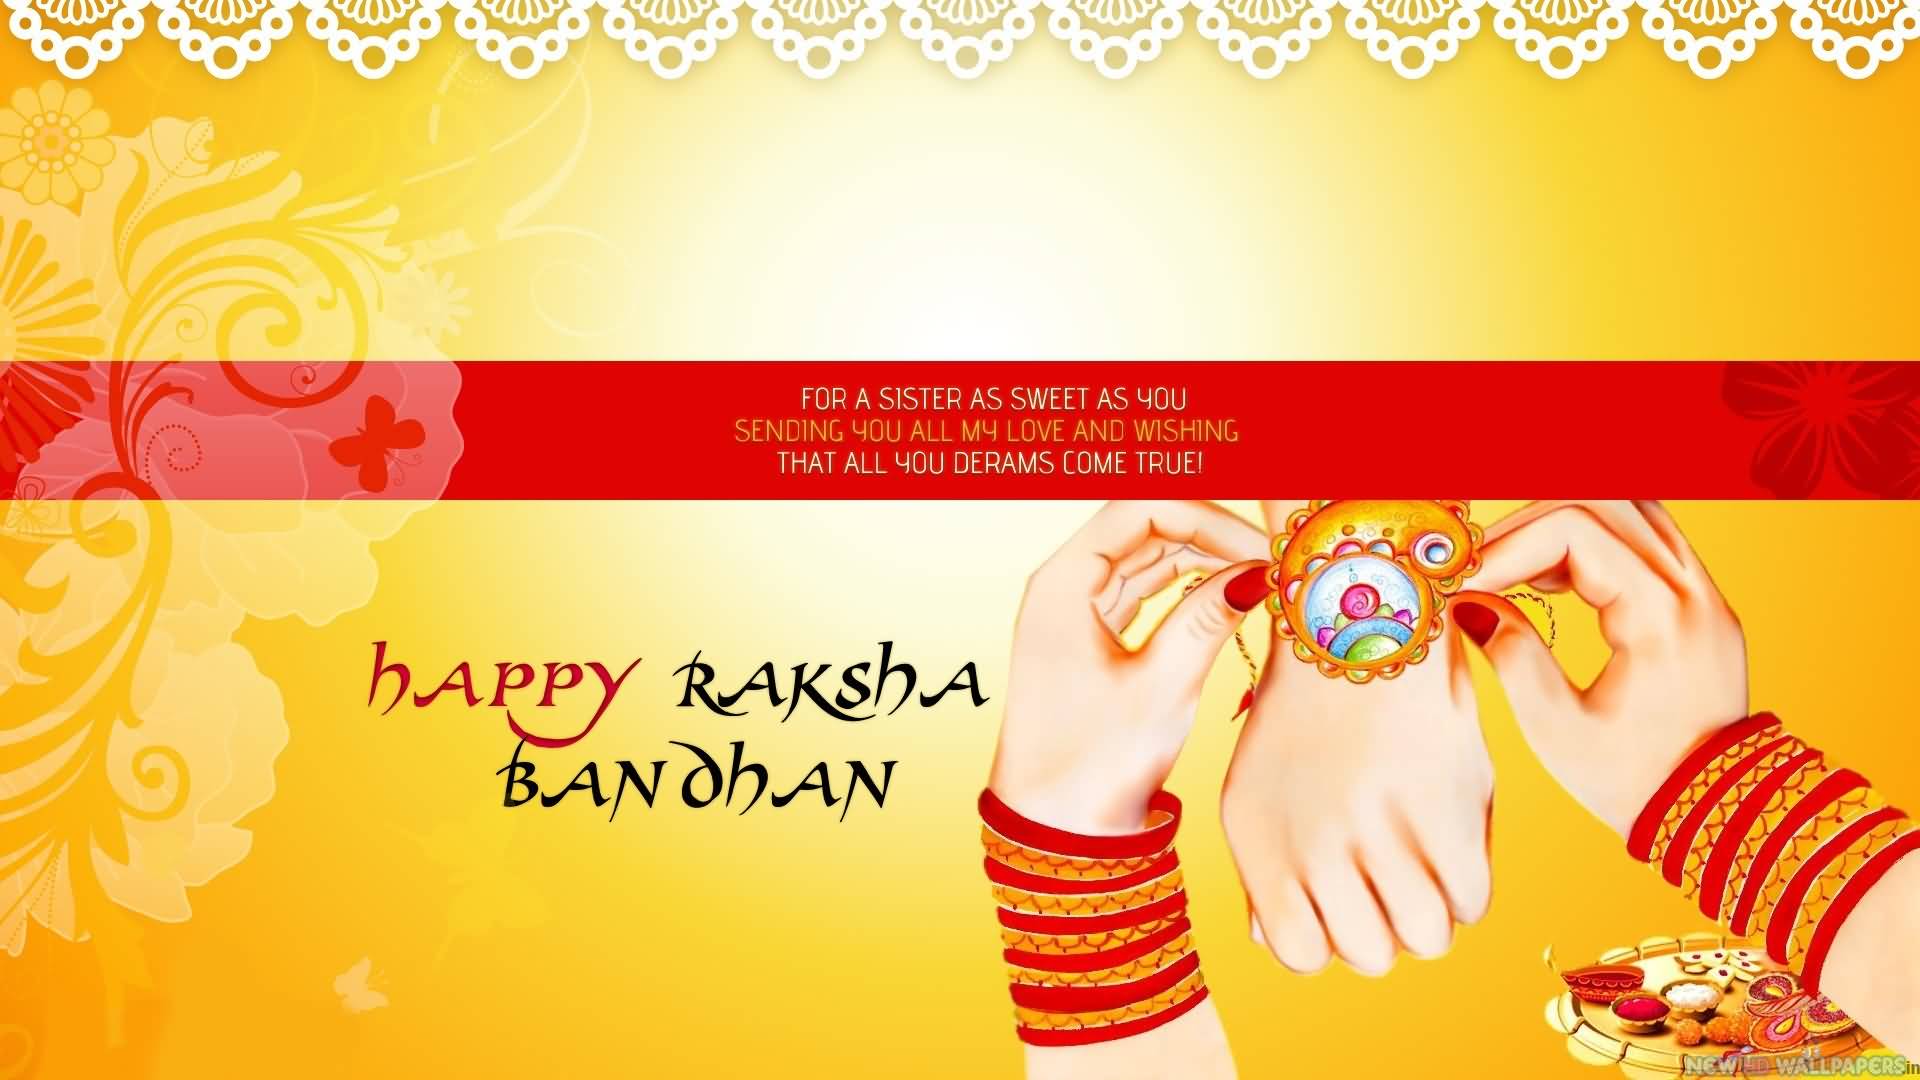 For A Sister As Sweet As You Sending You All My Love And Wishing That That All You Dreams Come True Happy Raksha Bandhan